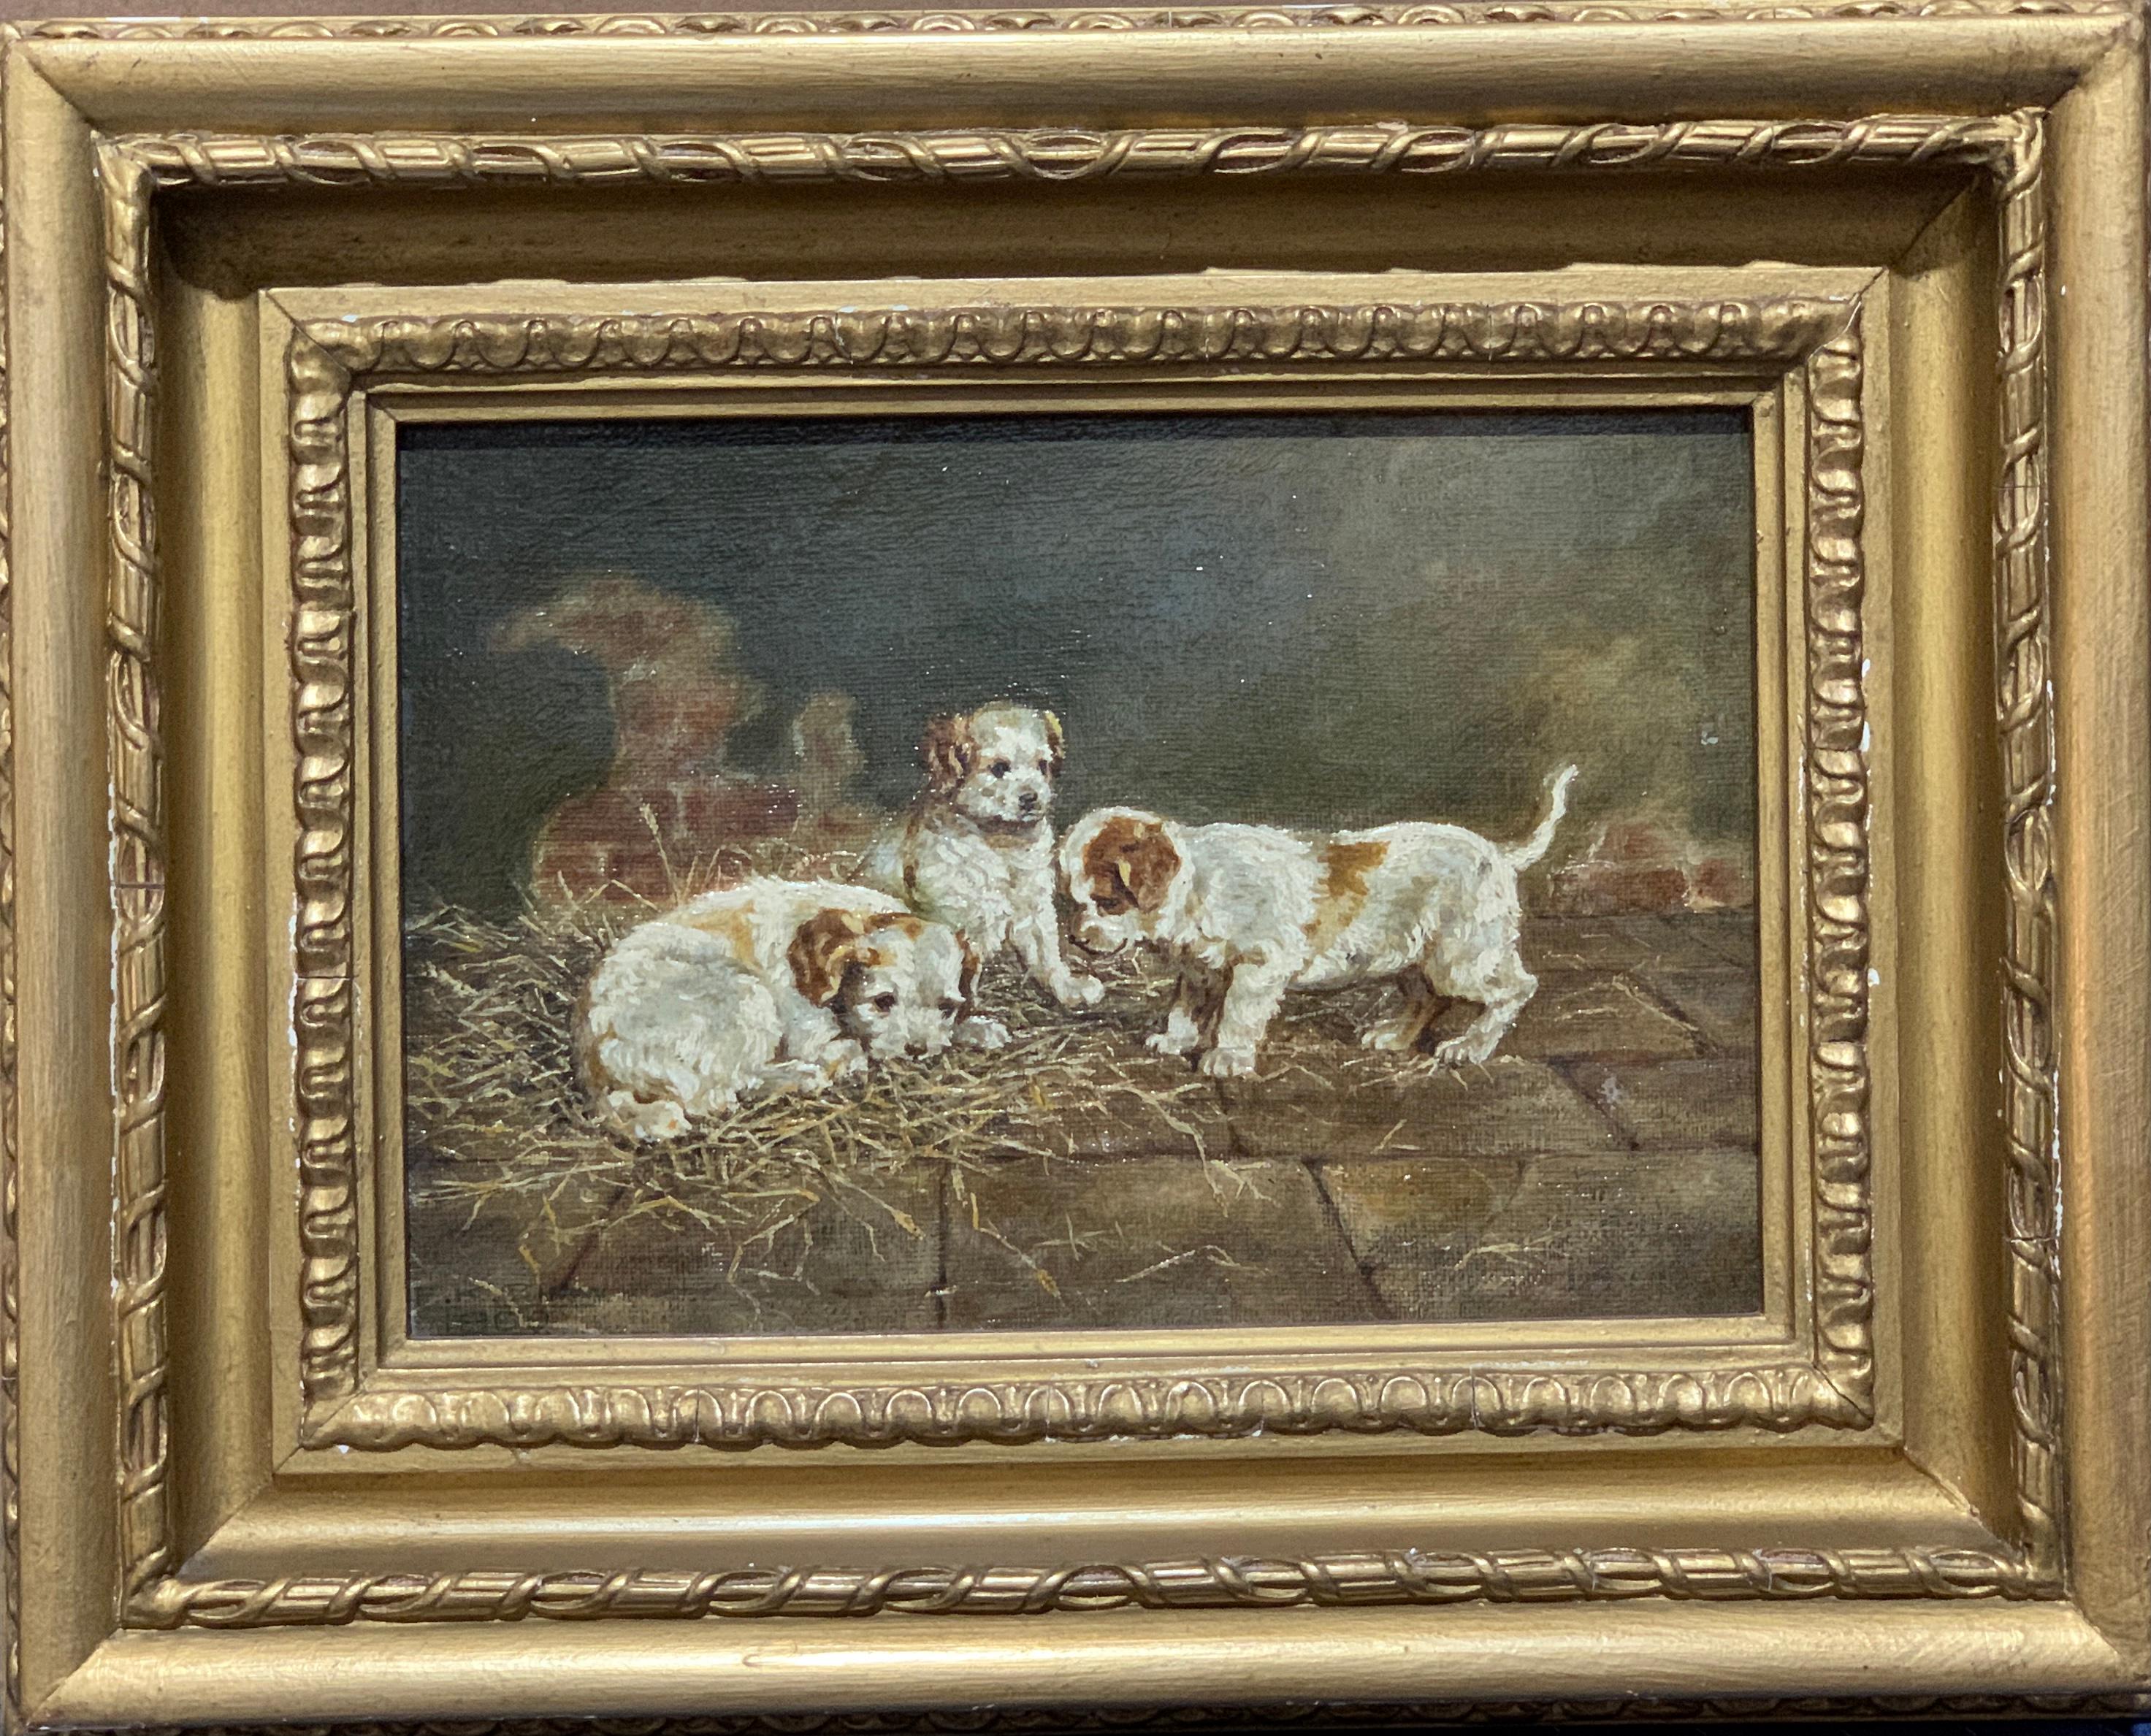 F.K.Shaw Animal Painting - 19th century English portrait of 3 Jack Russel puppies playing in an interior